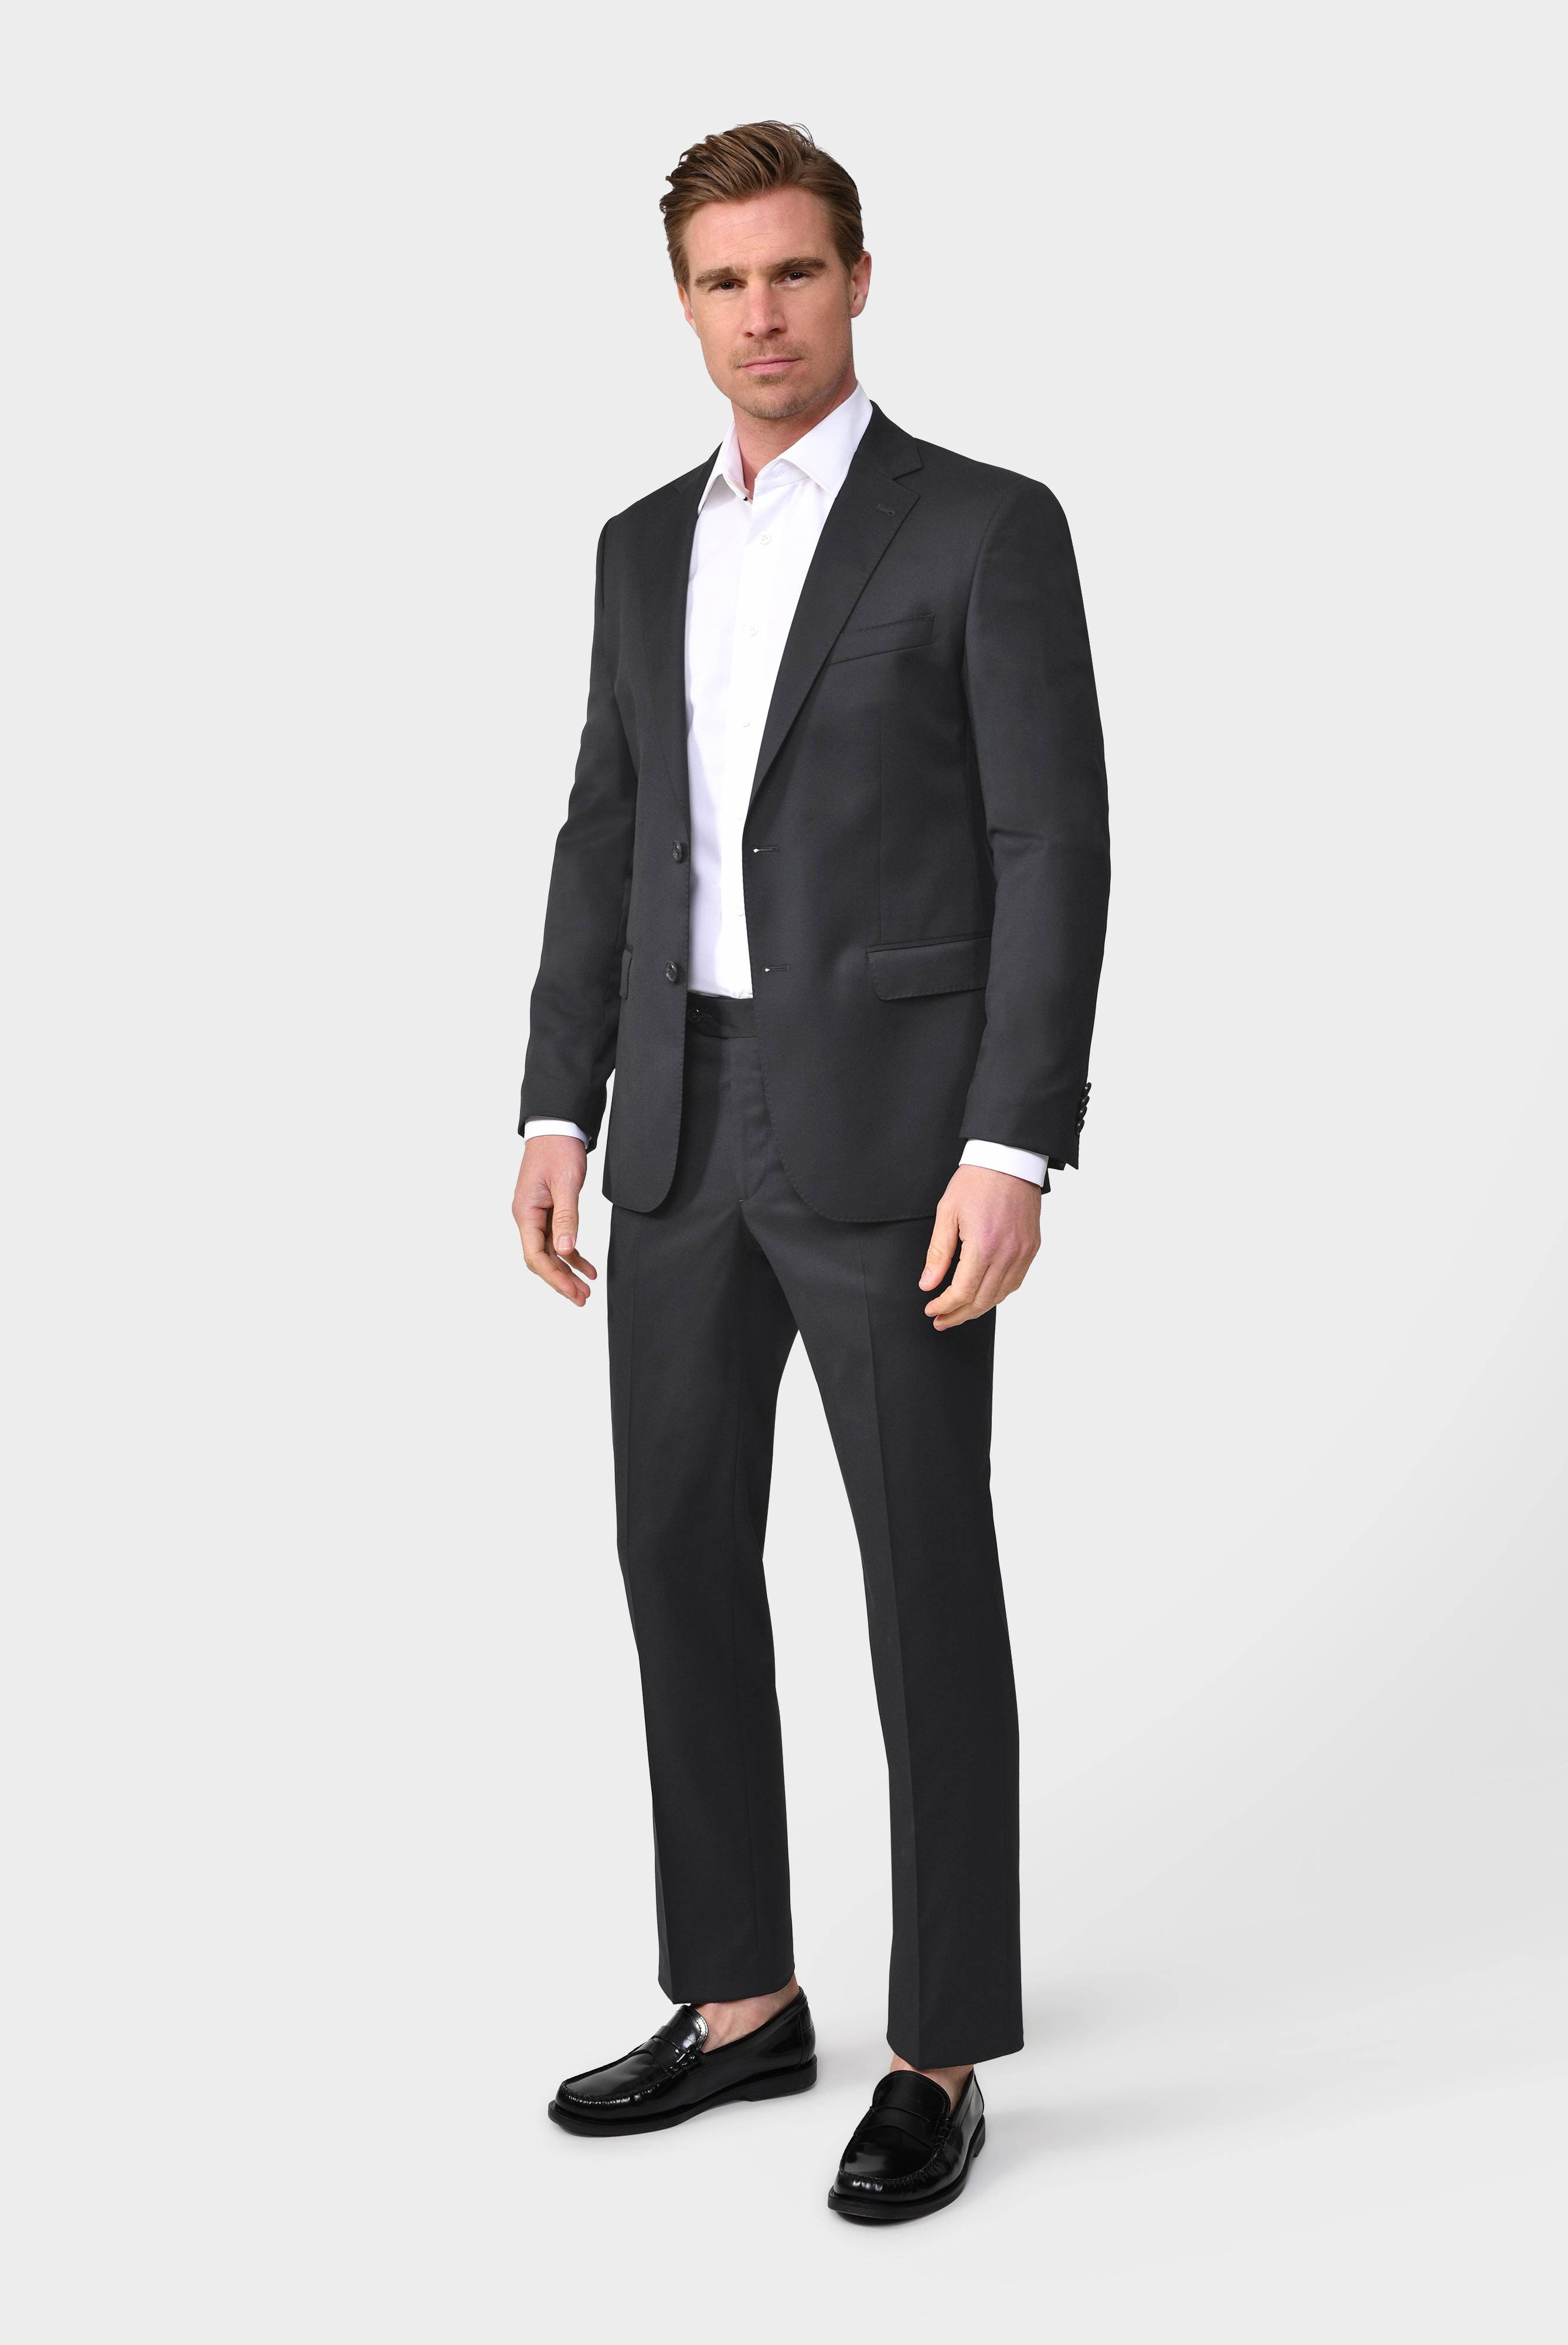 Jeans & Trousers+Men''s pants made of merino wool+80.7804.16.H01000.090.46